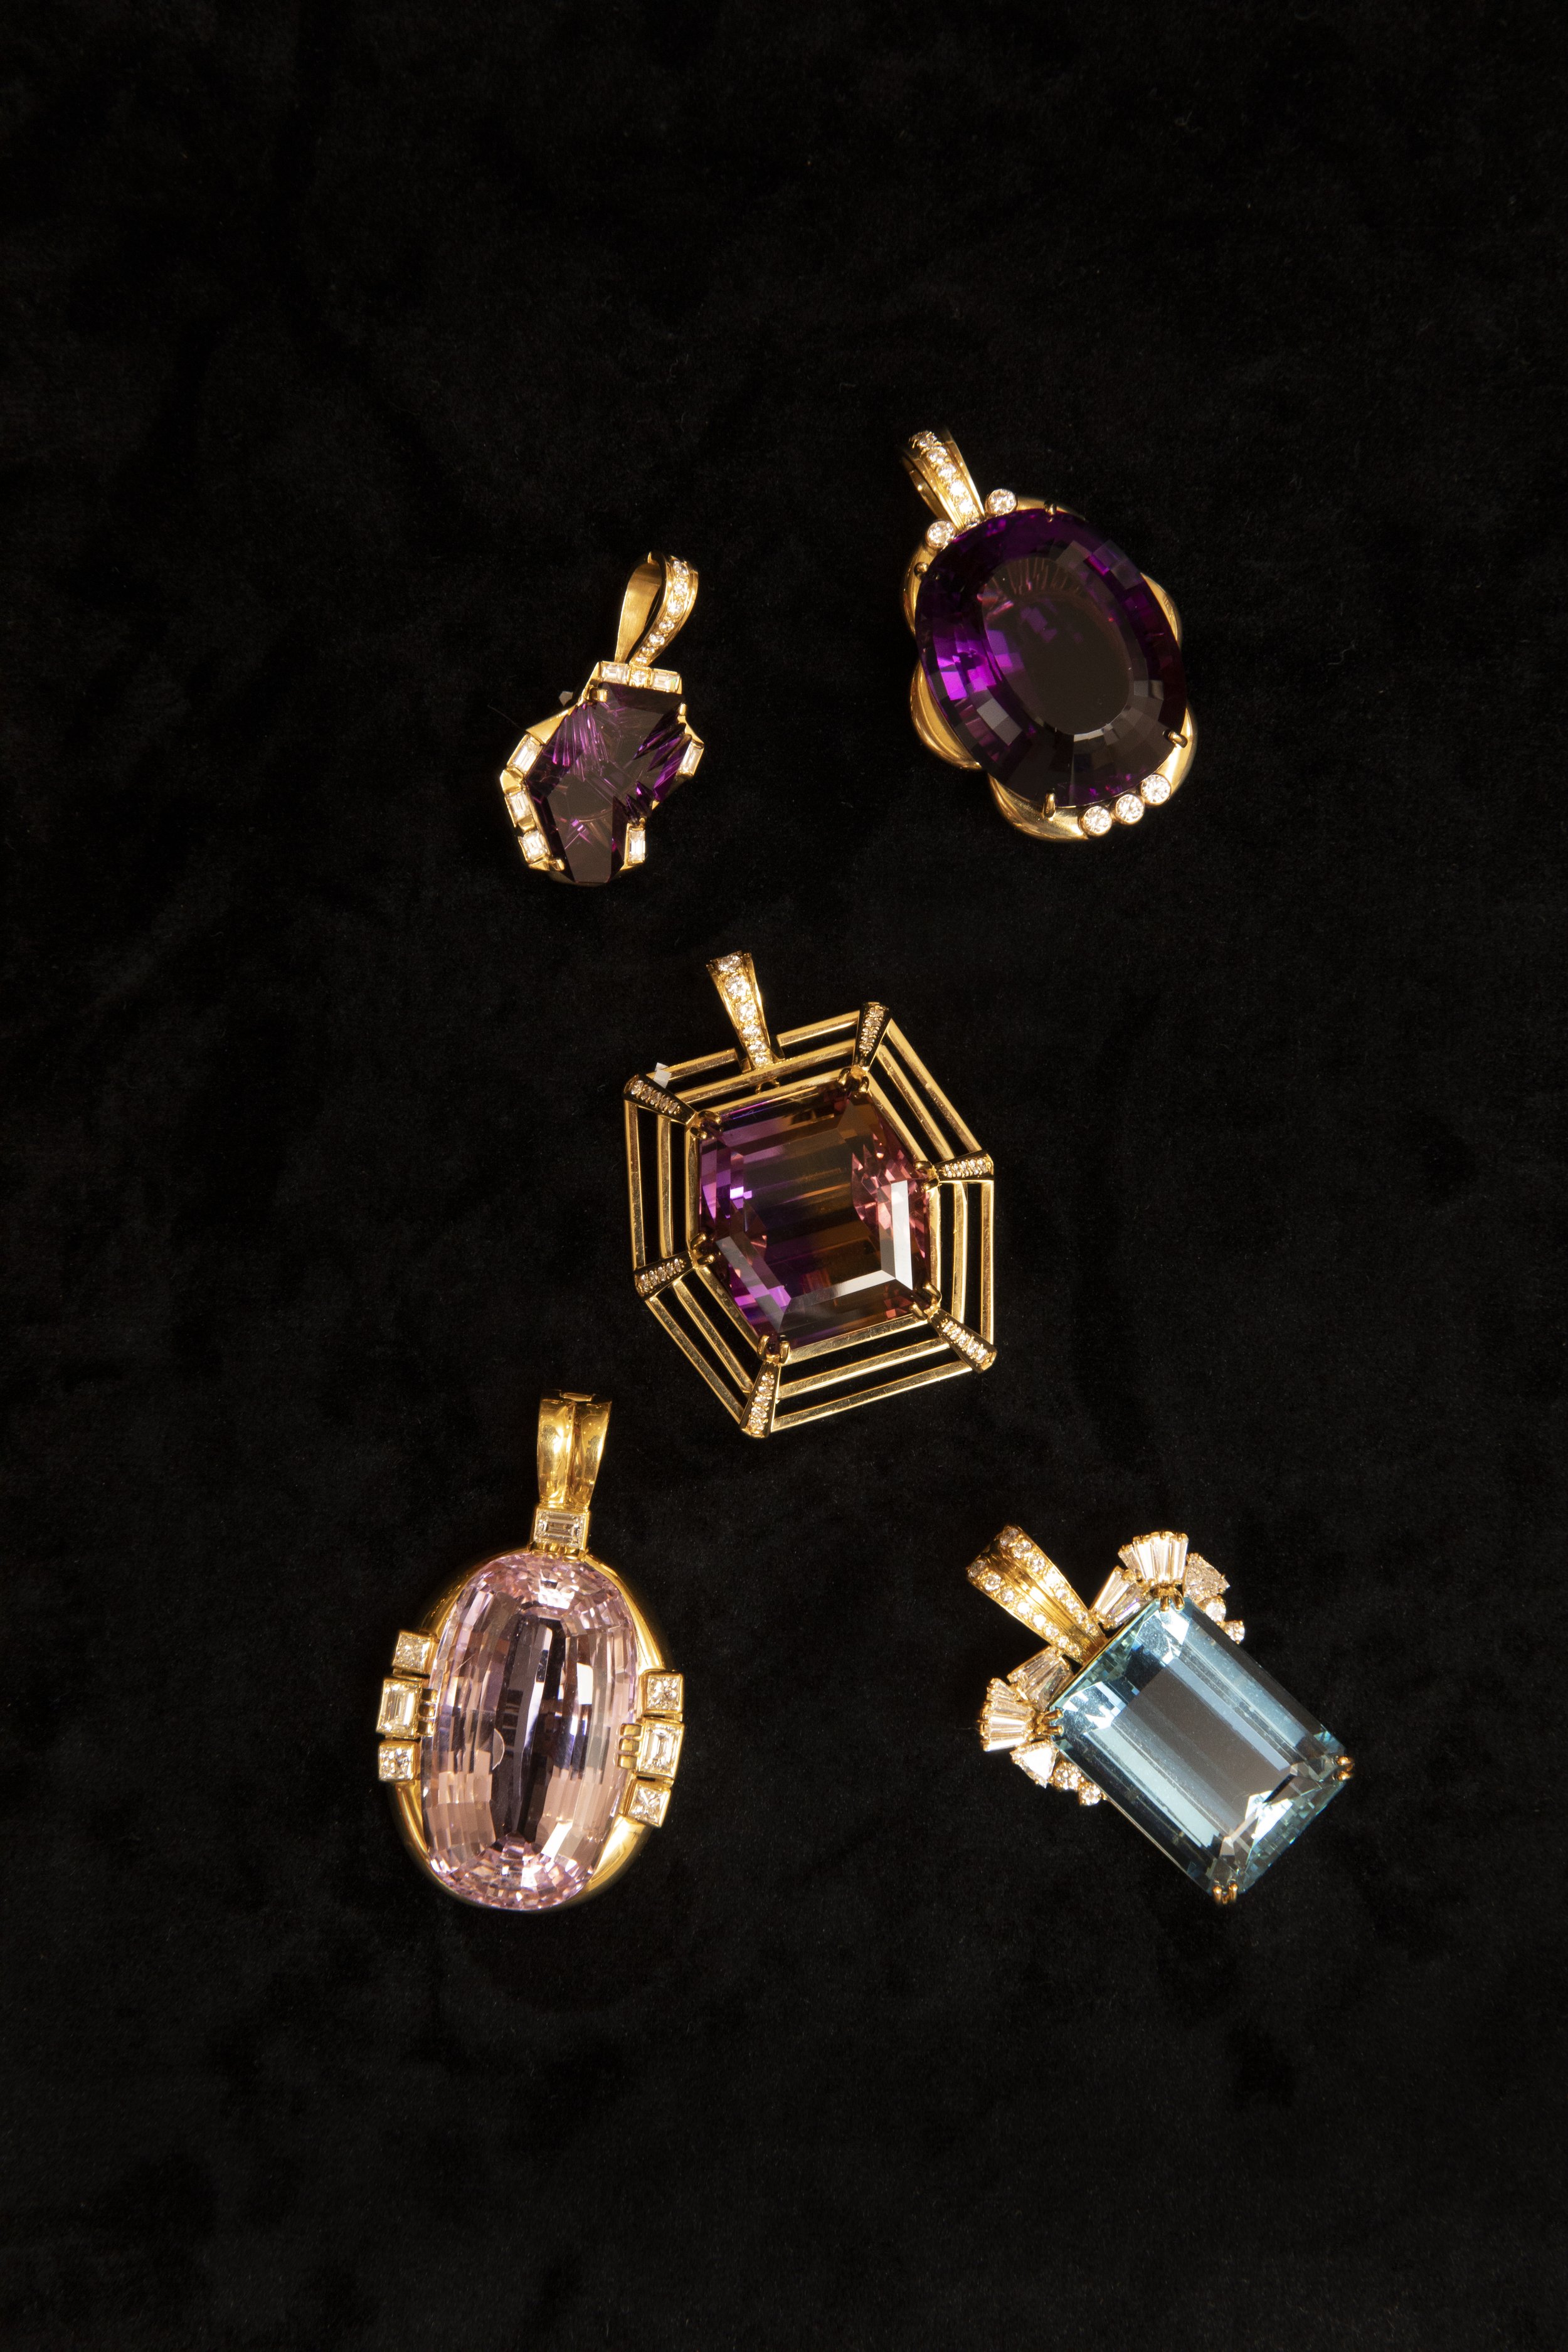  A peek into Bruce Bucky’s treasure chest from his global quest for precious gemstones.    Photos by Leah Friel  